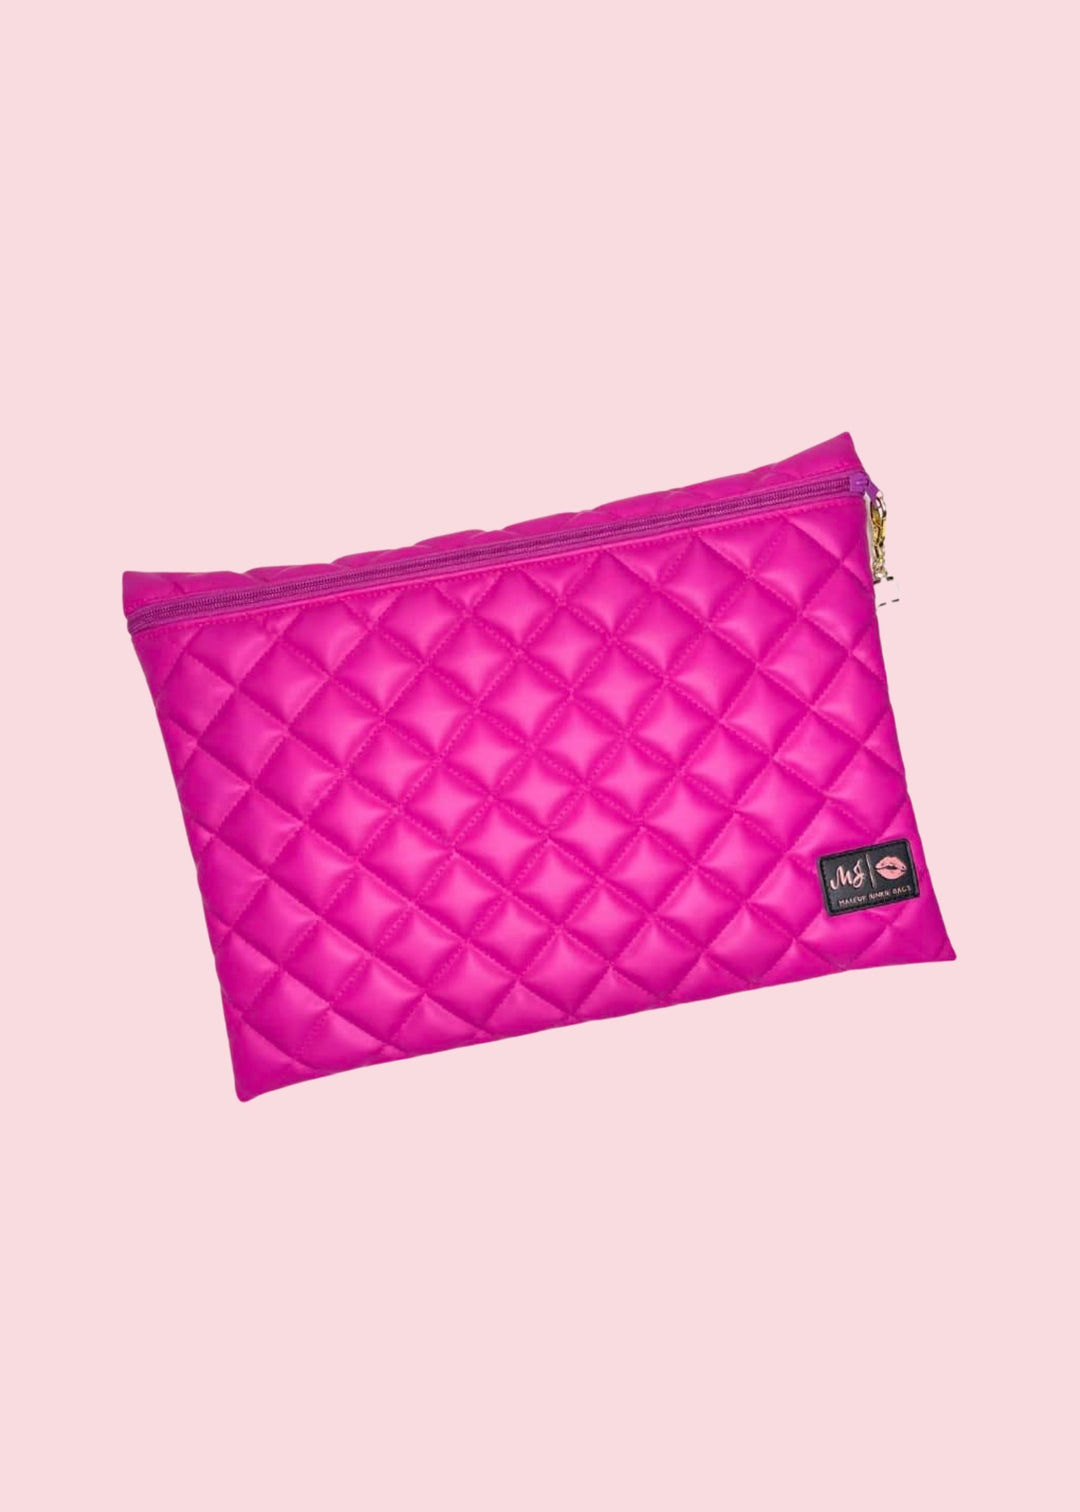 Makeup Junkie Bags - Luxe Hot Fuchsia Quilted Laptop Case [Pre-Order]